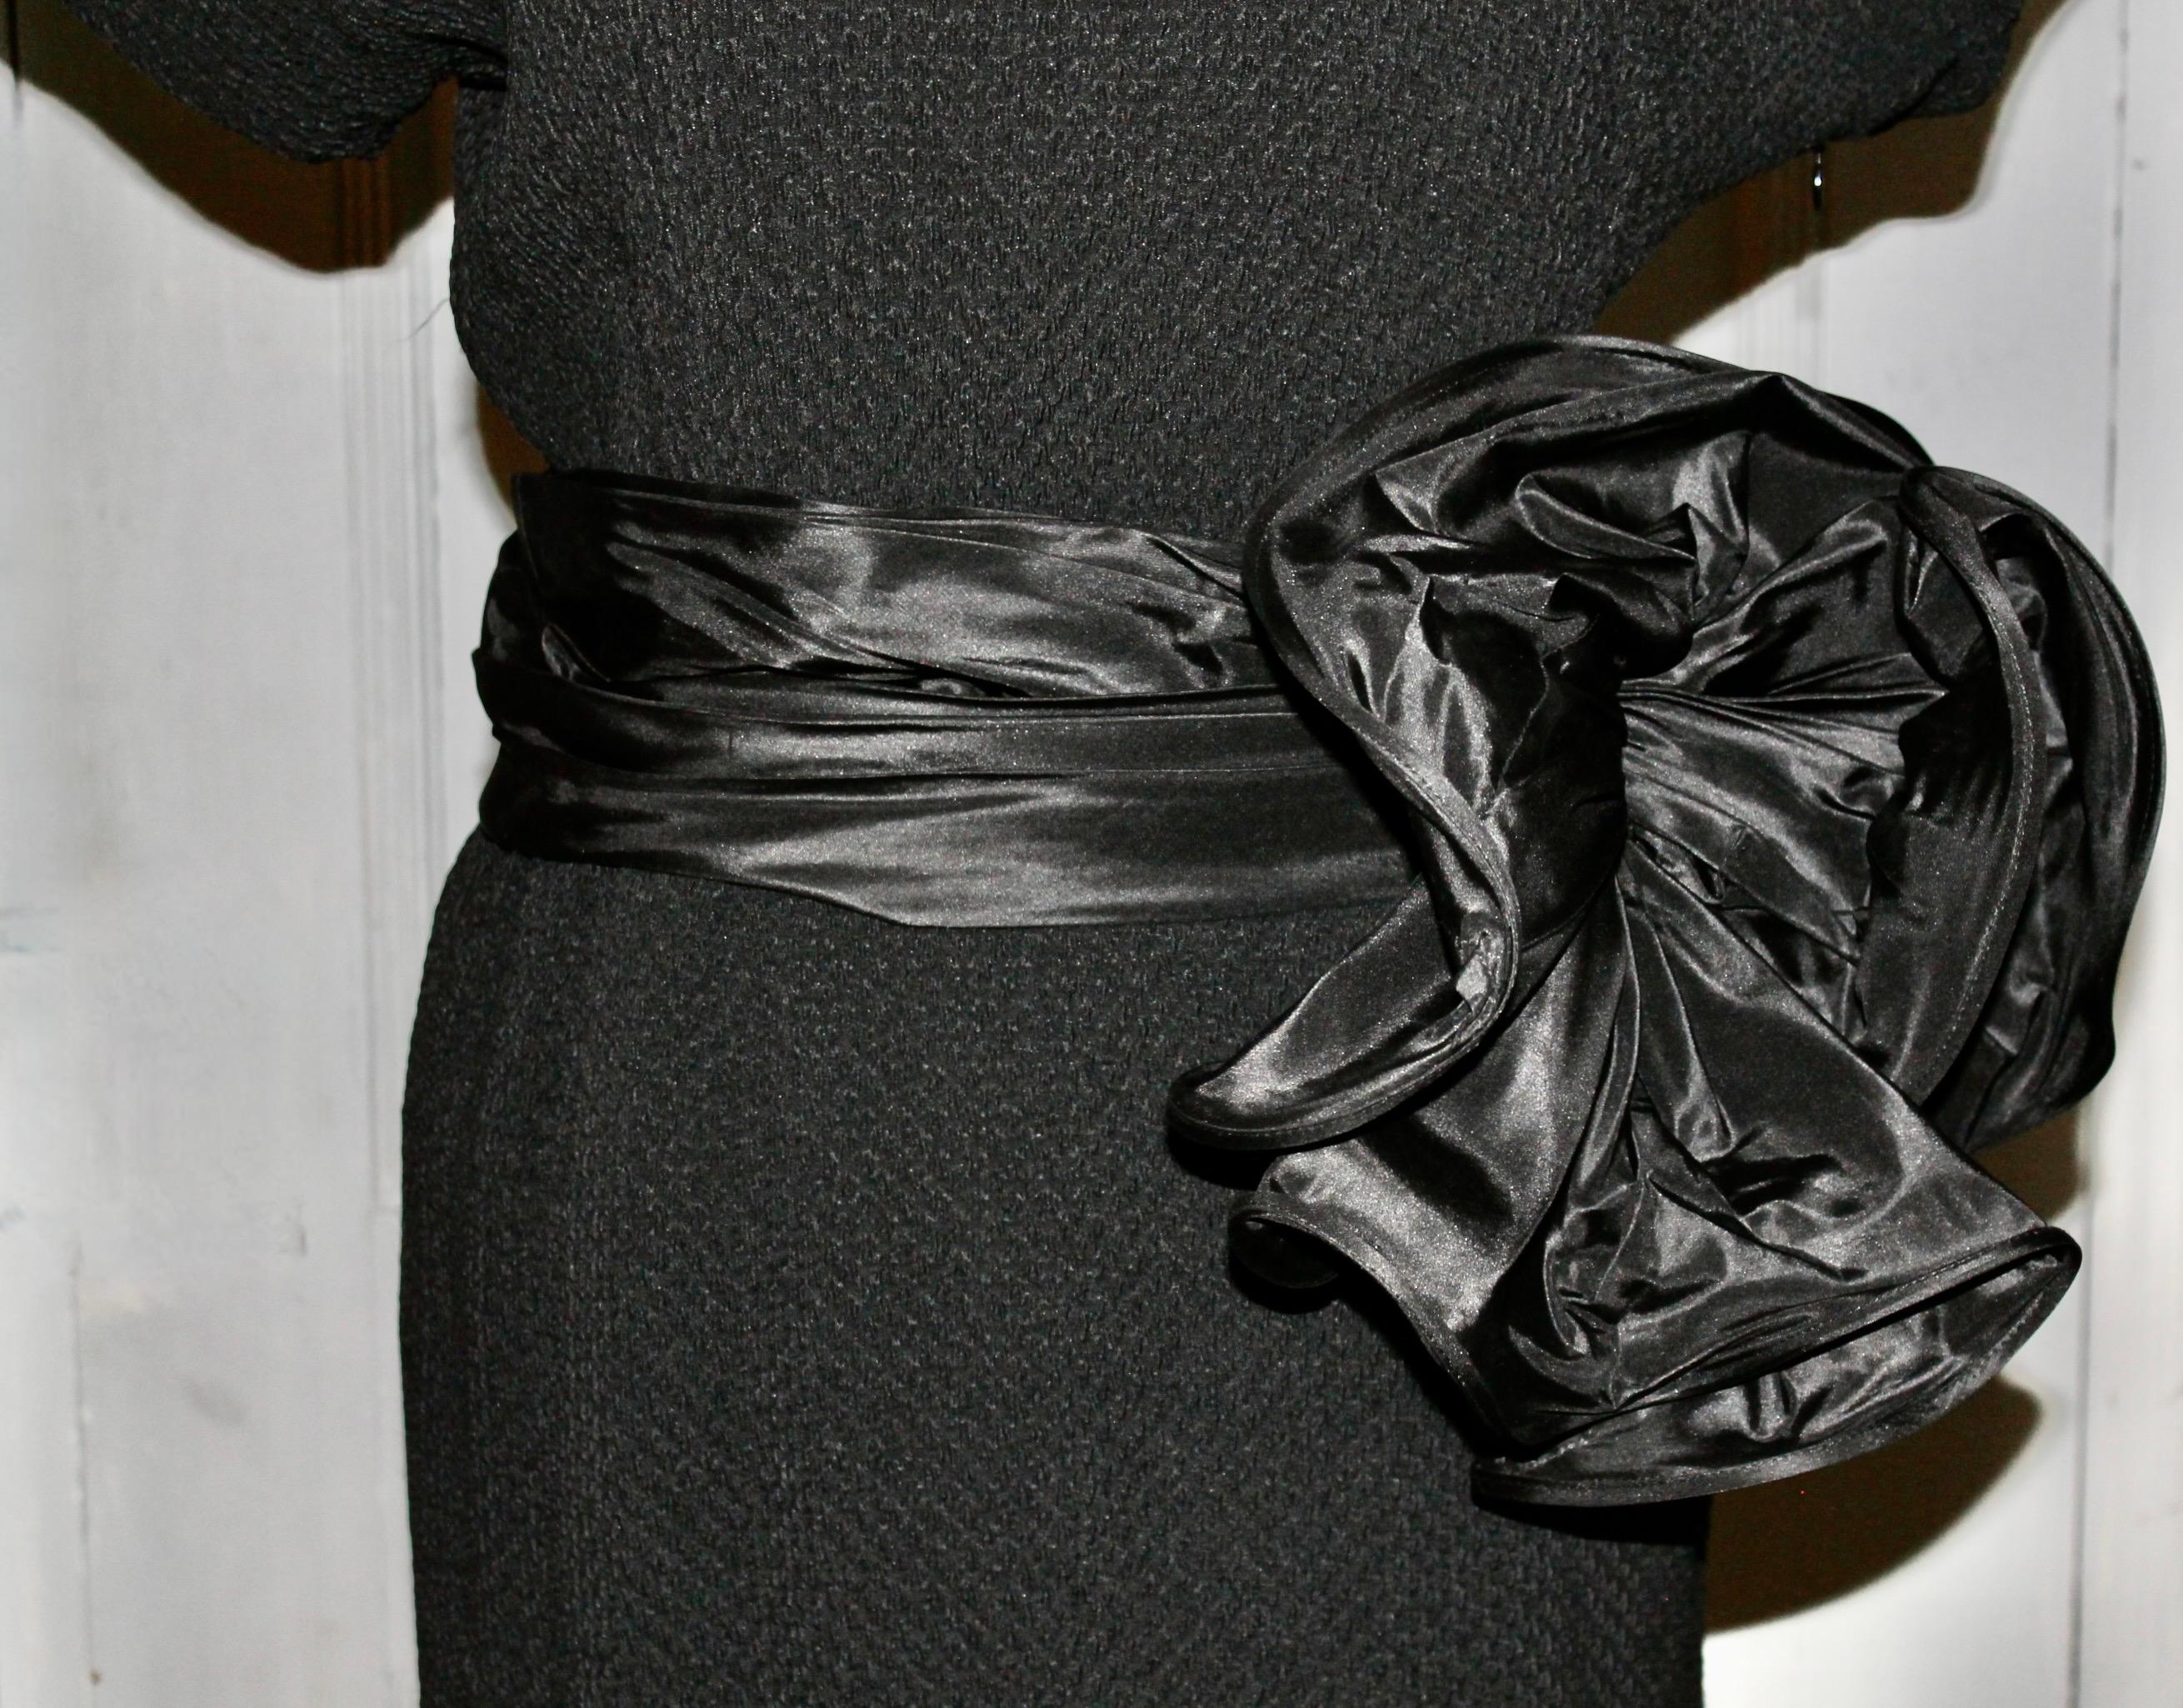 A beautiful YSL Rive Gauche Paris, France black cocktail dress, with a silk belt with a large flower bow. Shoulders are lightly padded.  Zipper on side, button at neck opening in back. Acetate, rayon and silk. Size EU 40. 